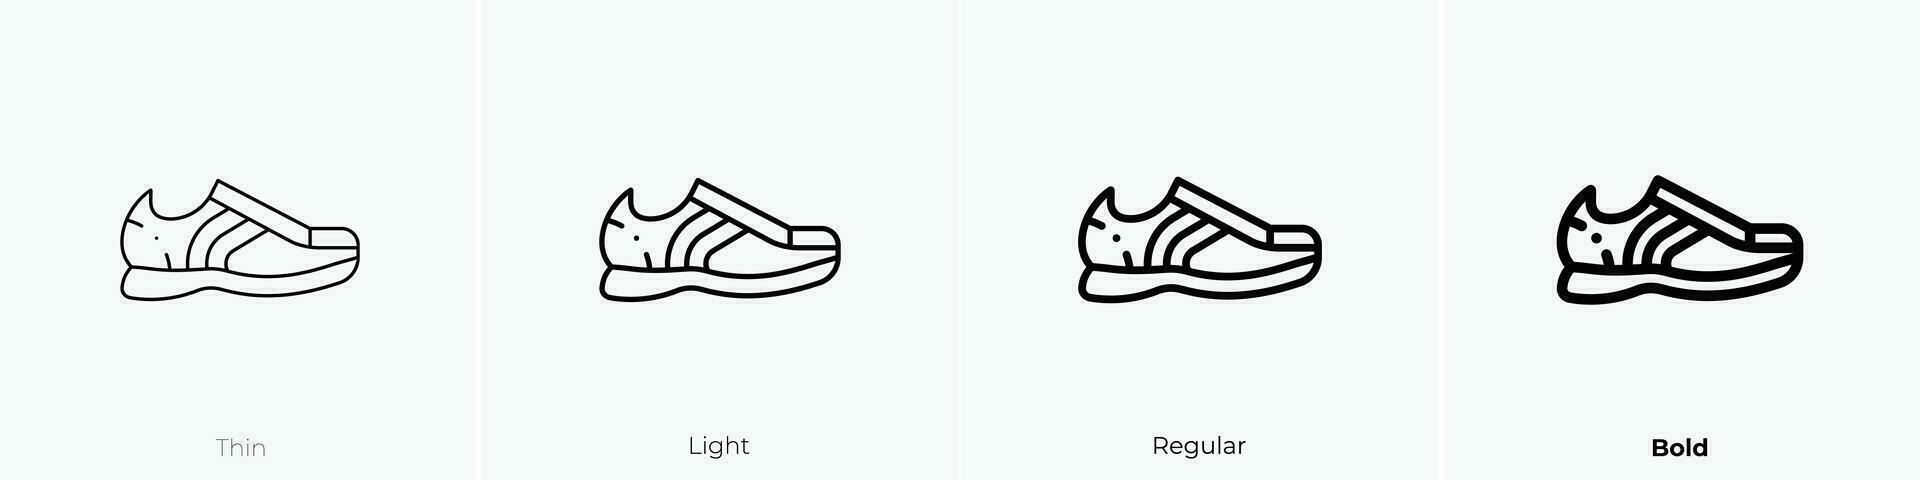 sneakers icon. Thin, Light, Regular And Bold style design isolated on white background vector